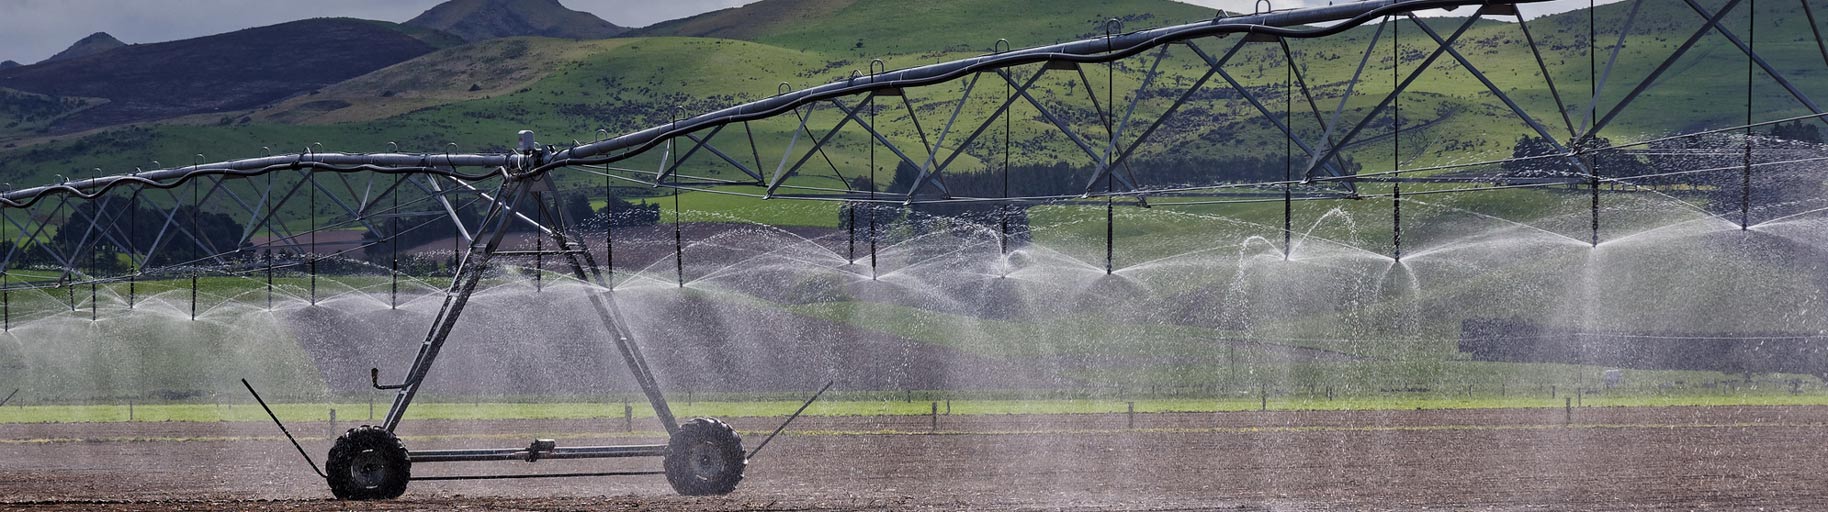 Irrigation and water take resource consents